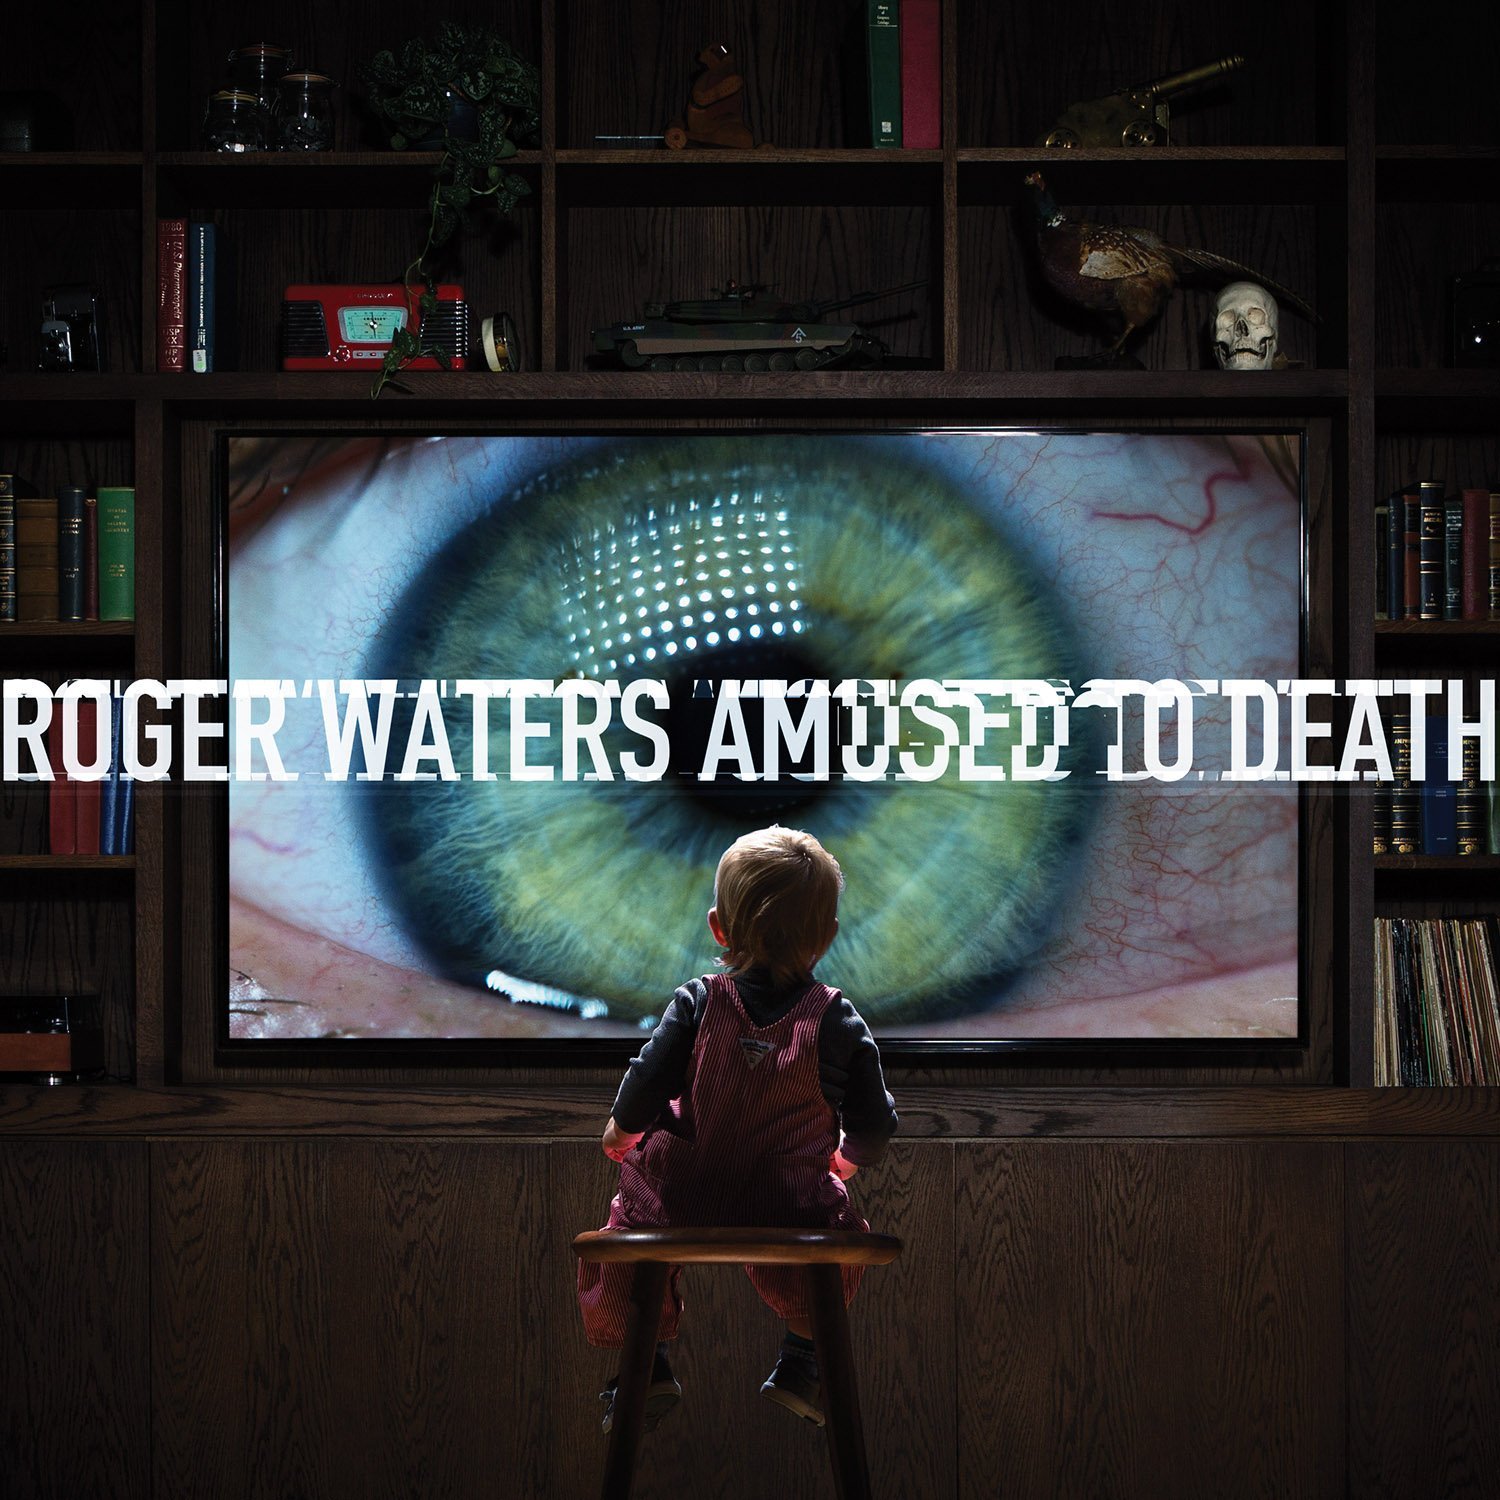 Roger Waters – Amused to death